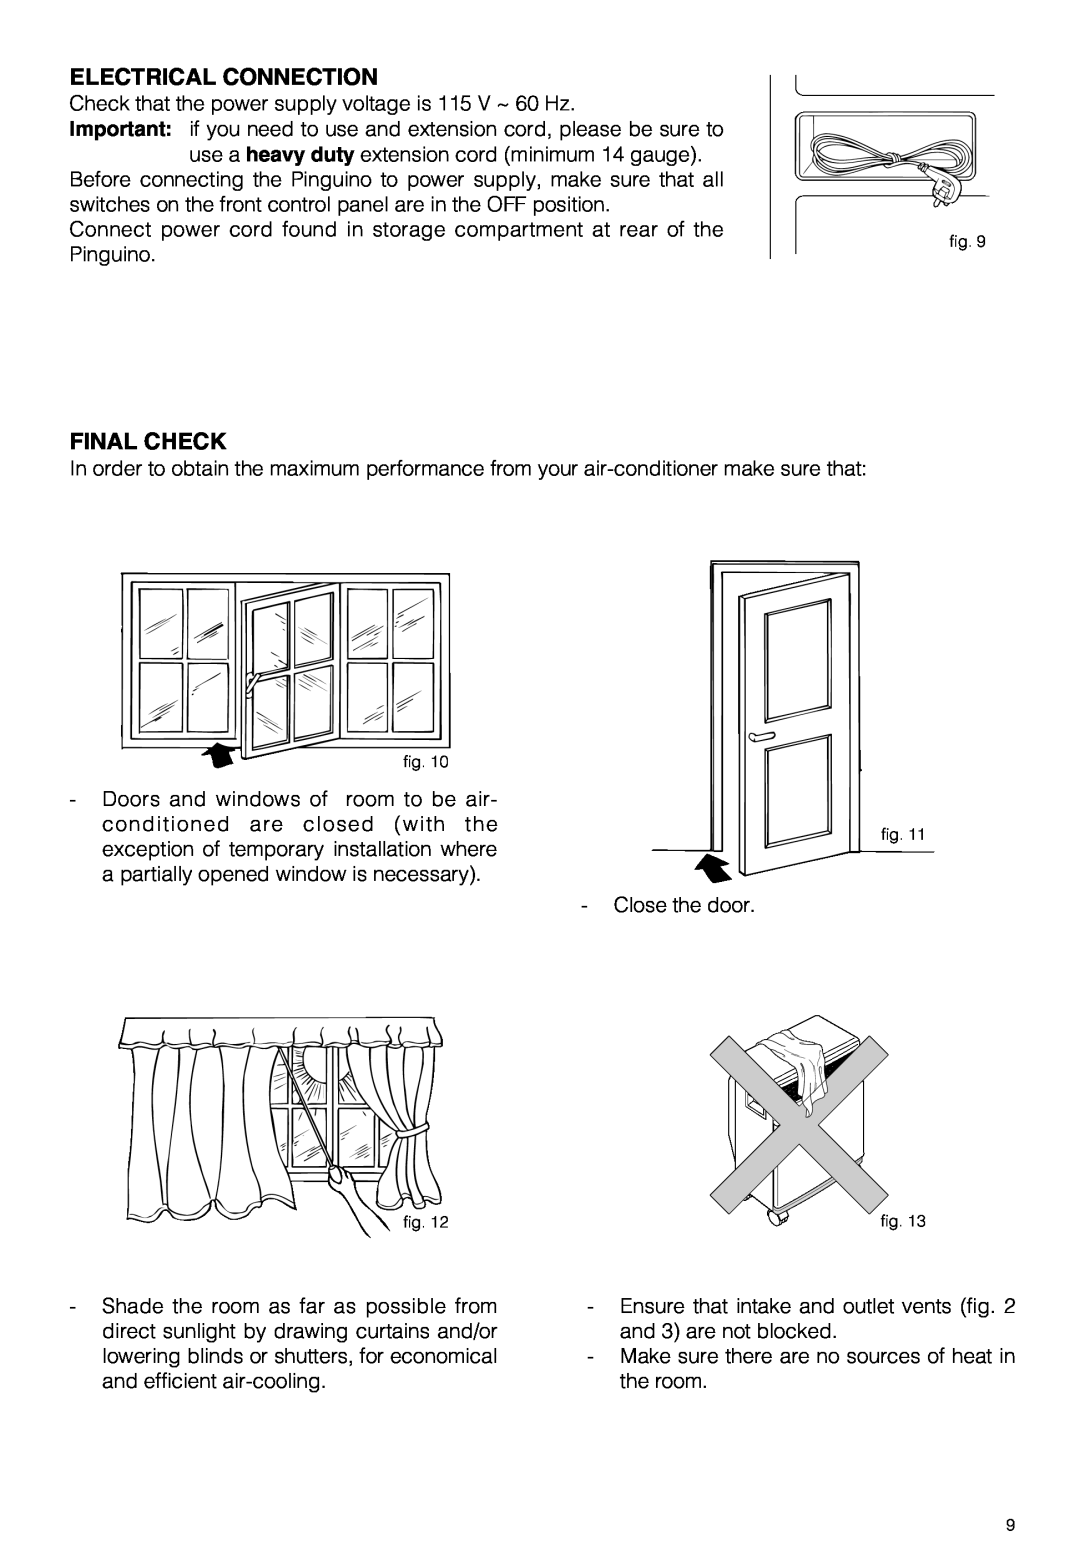 DeLonghi PAC 210 U owner manual Electrical Connection, Final Check 